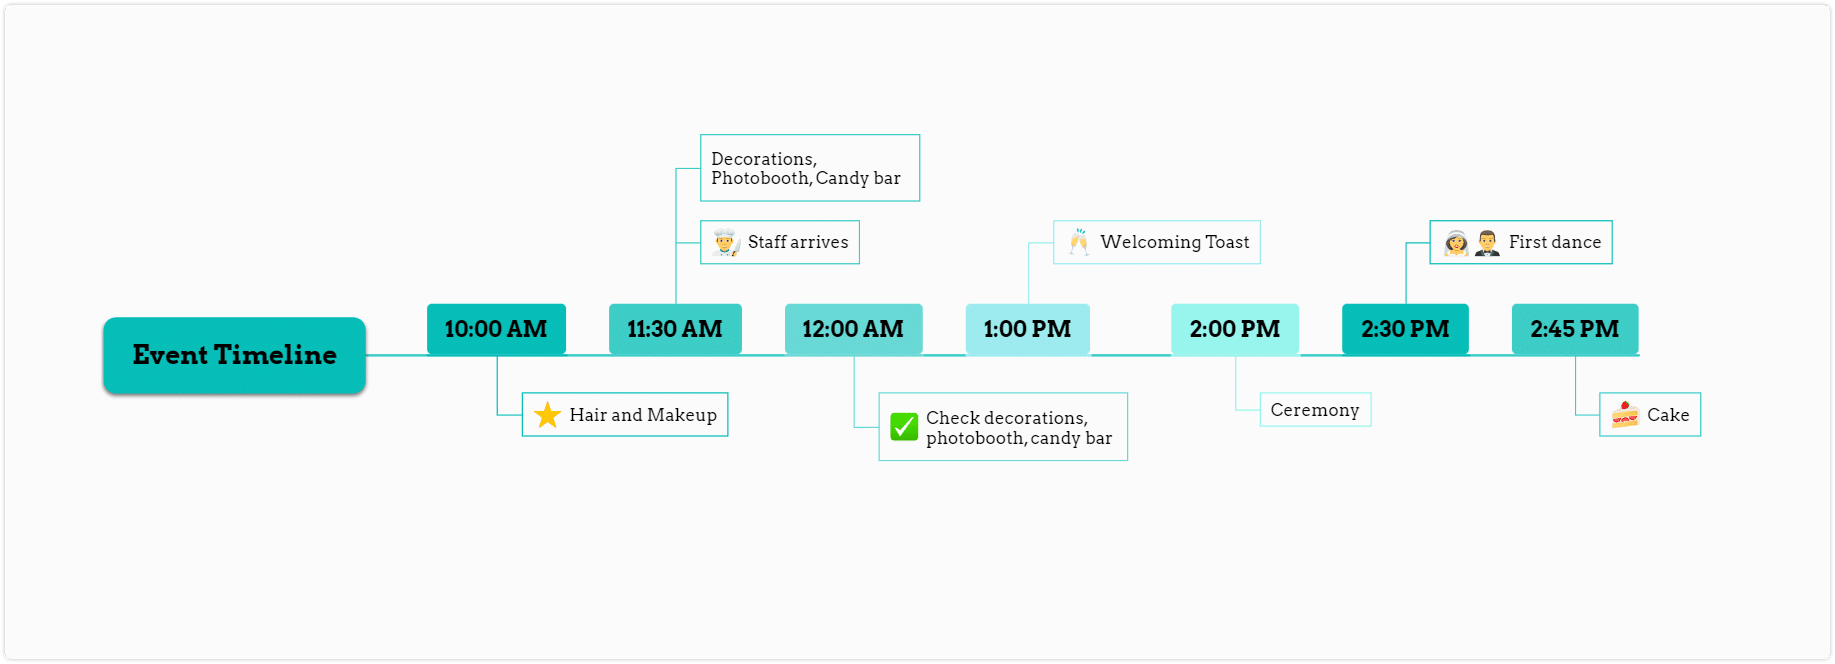 how to plan an event - timeline example